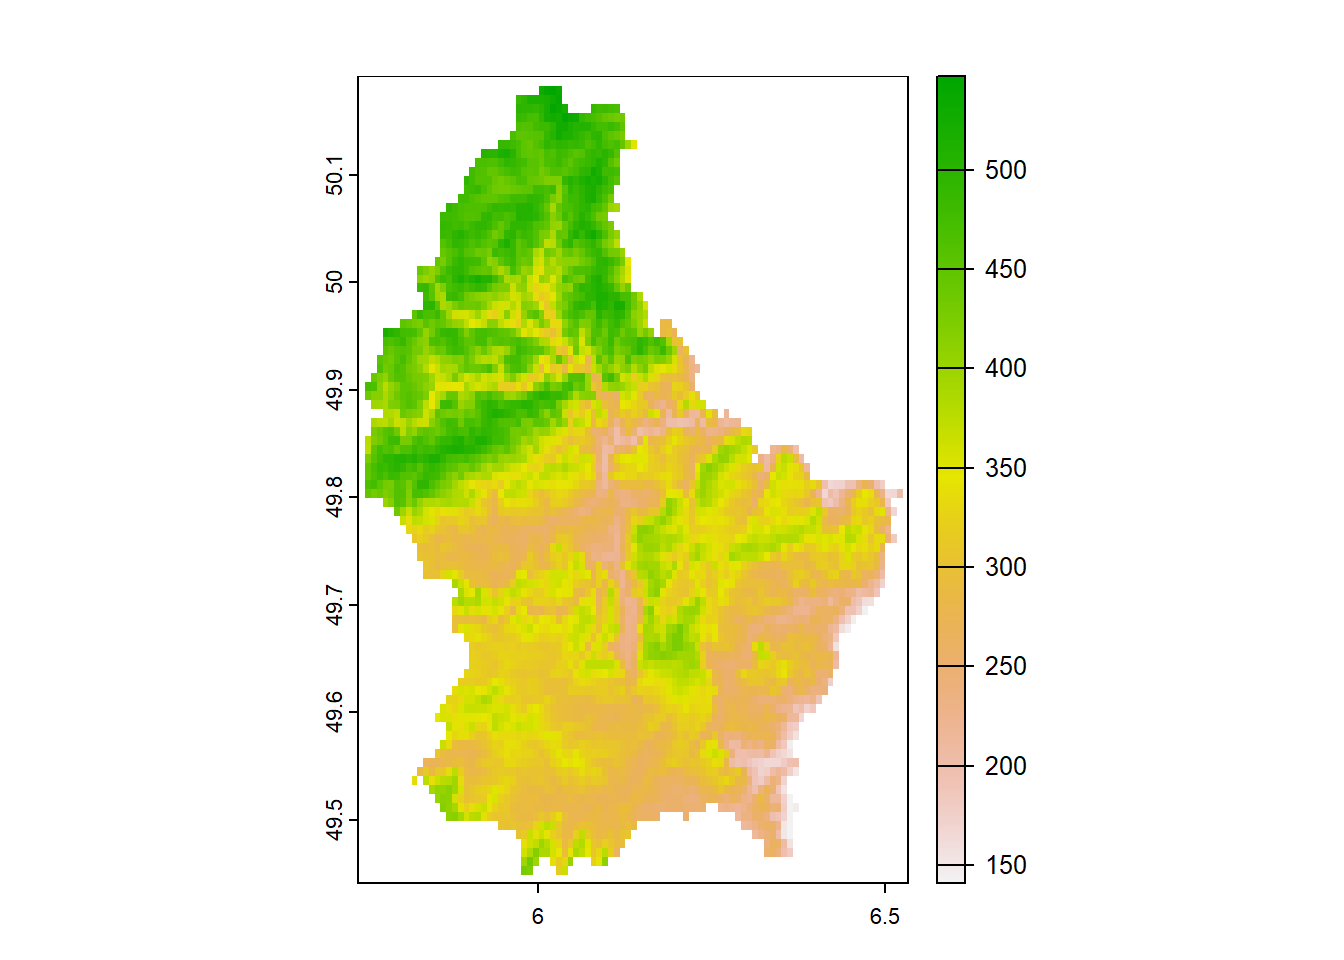 Left: Example of raster data with cells colored according to their values. Right: Map of raster data representing the elevation of .